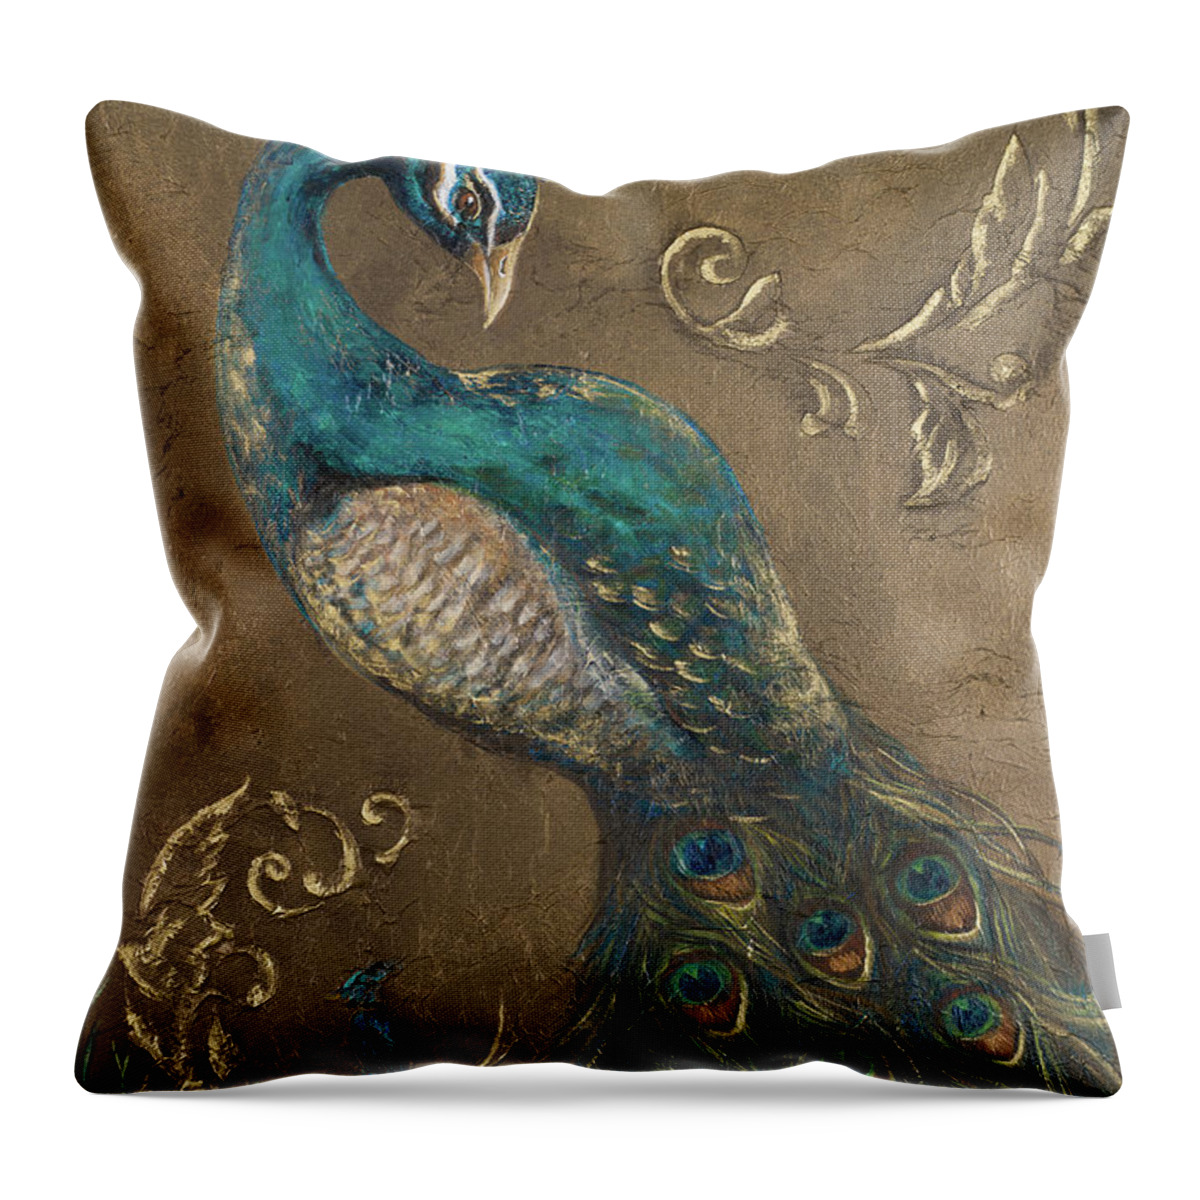 Peacock Throw Pillow featuring the painting Pershing Peacock II by Tiffany Hakimipour